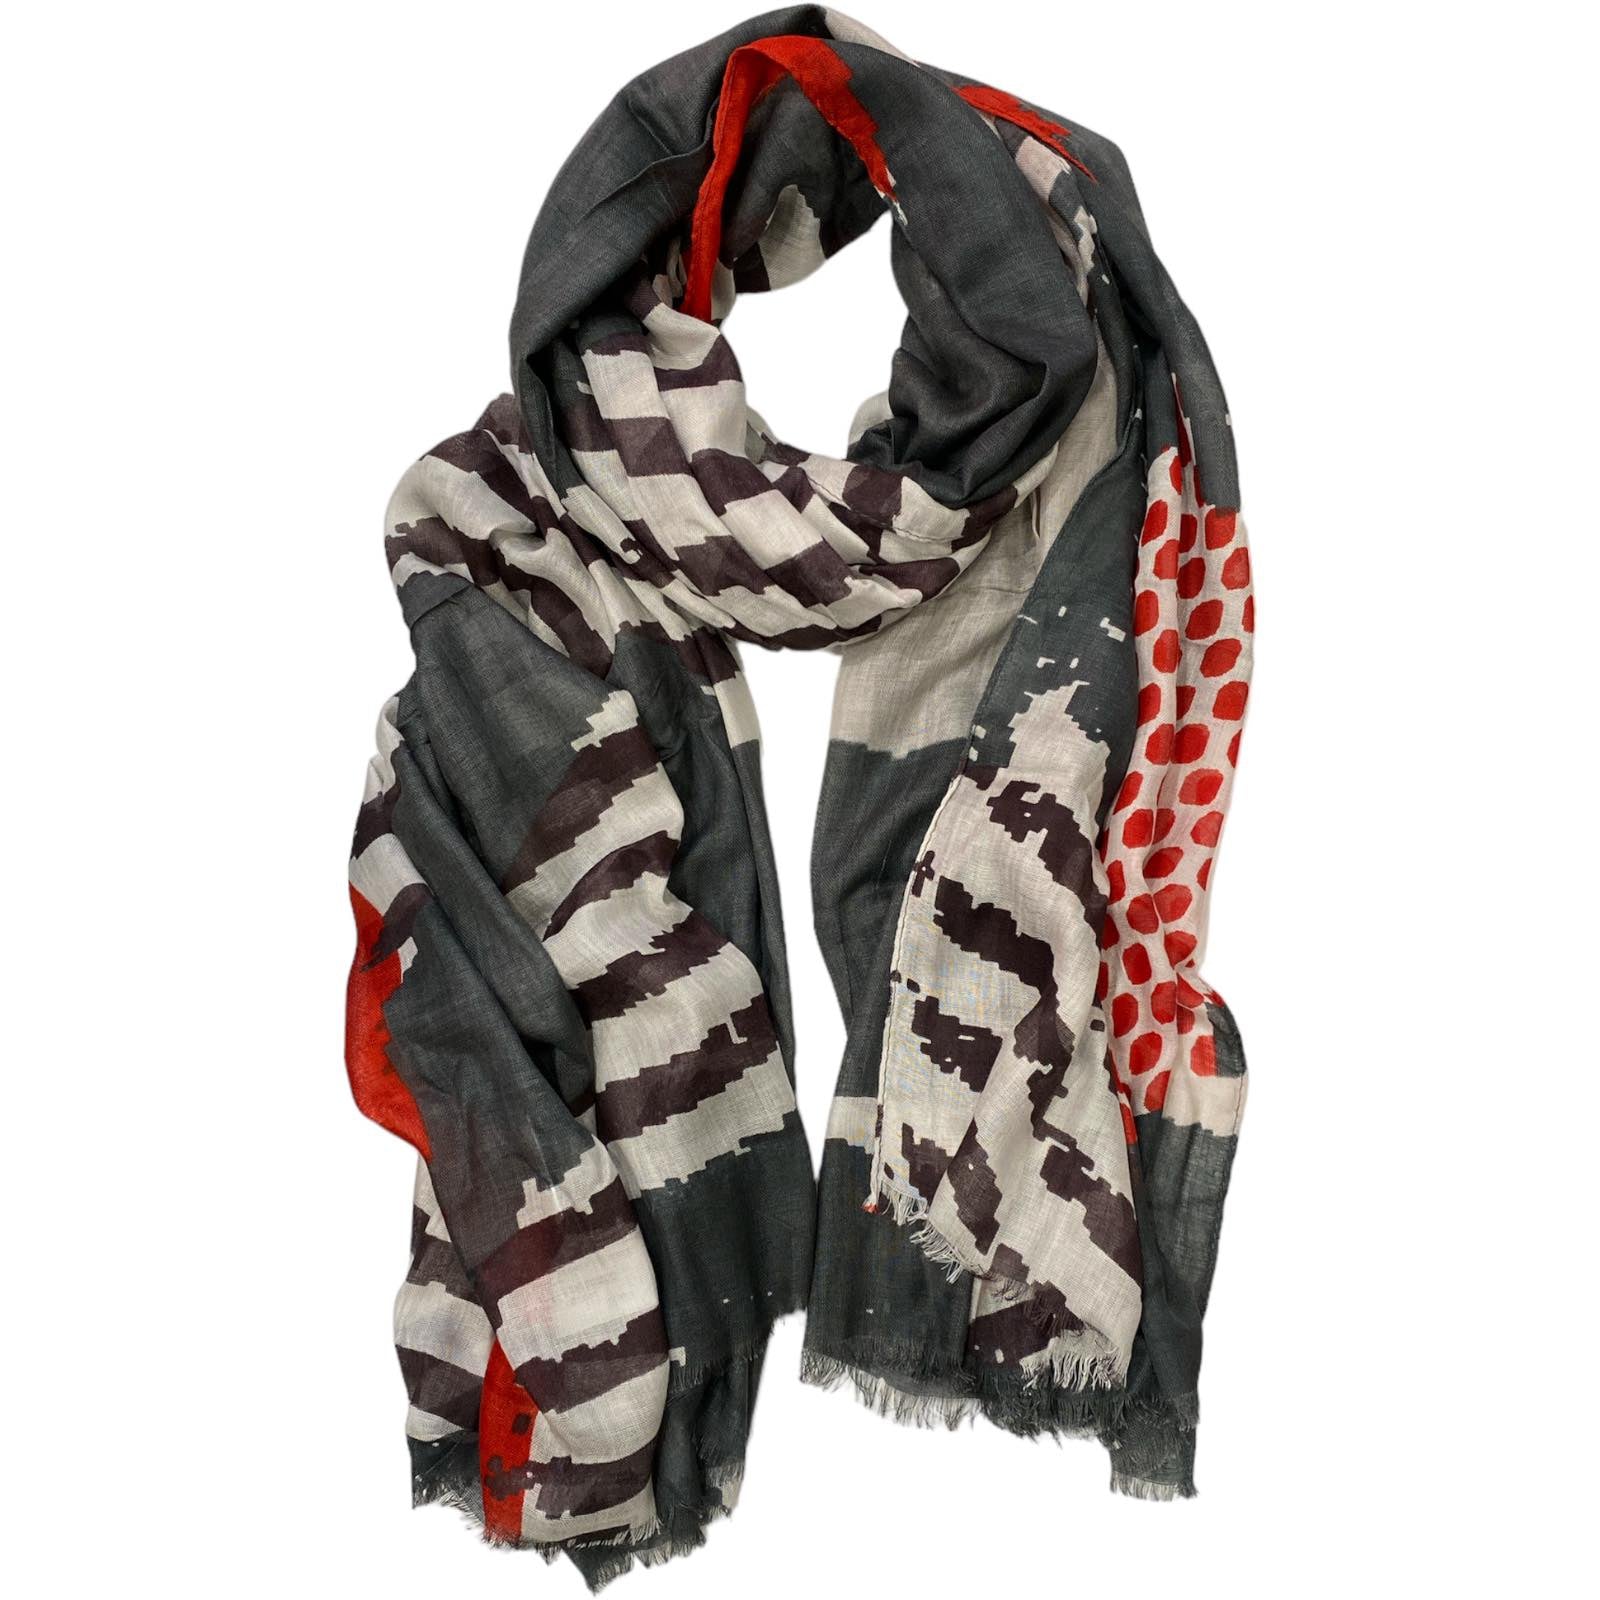 Art scarf with red and grey details